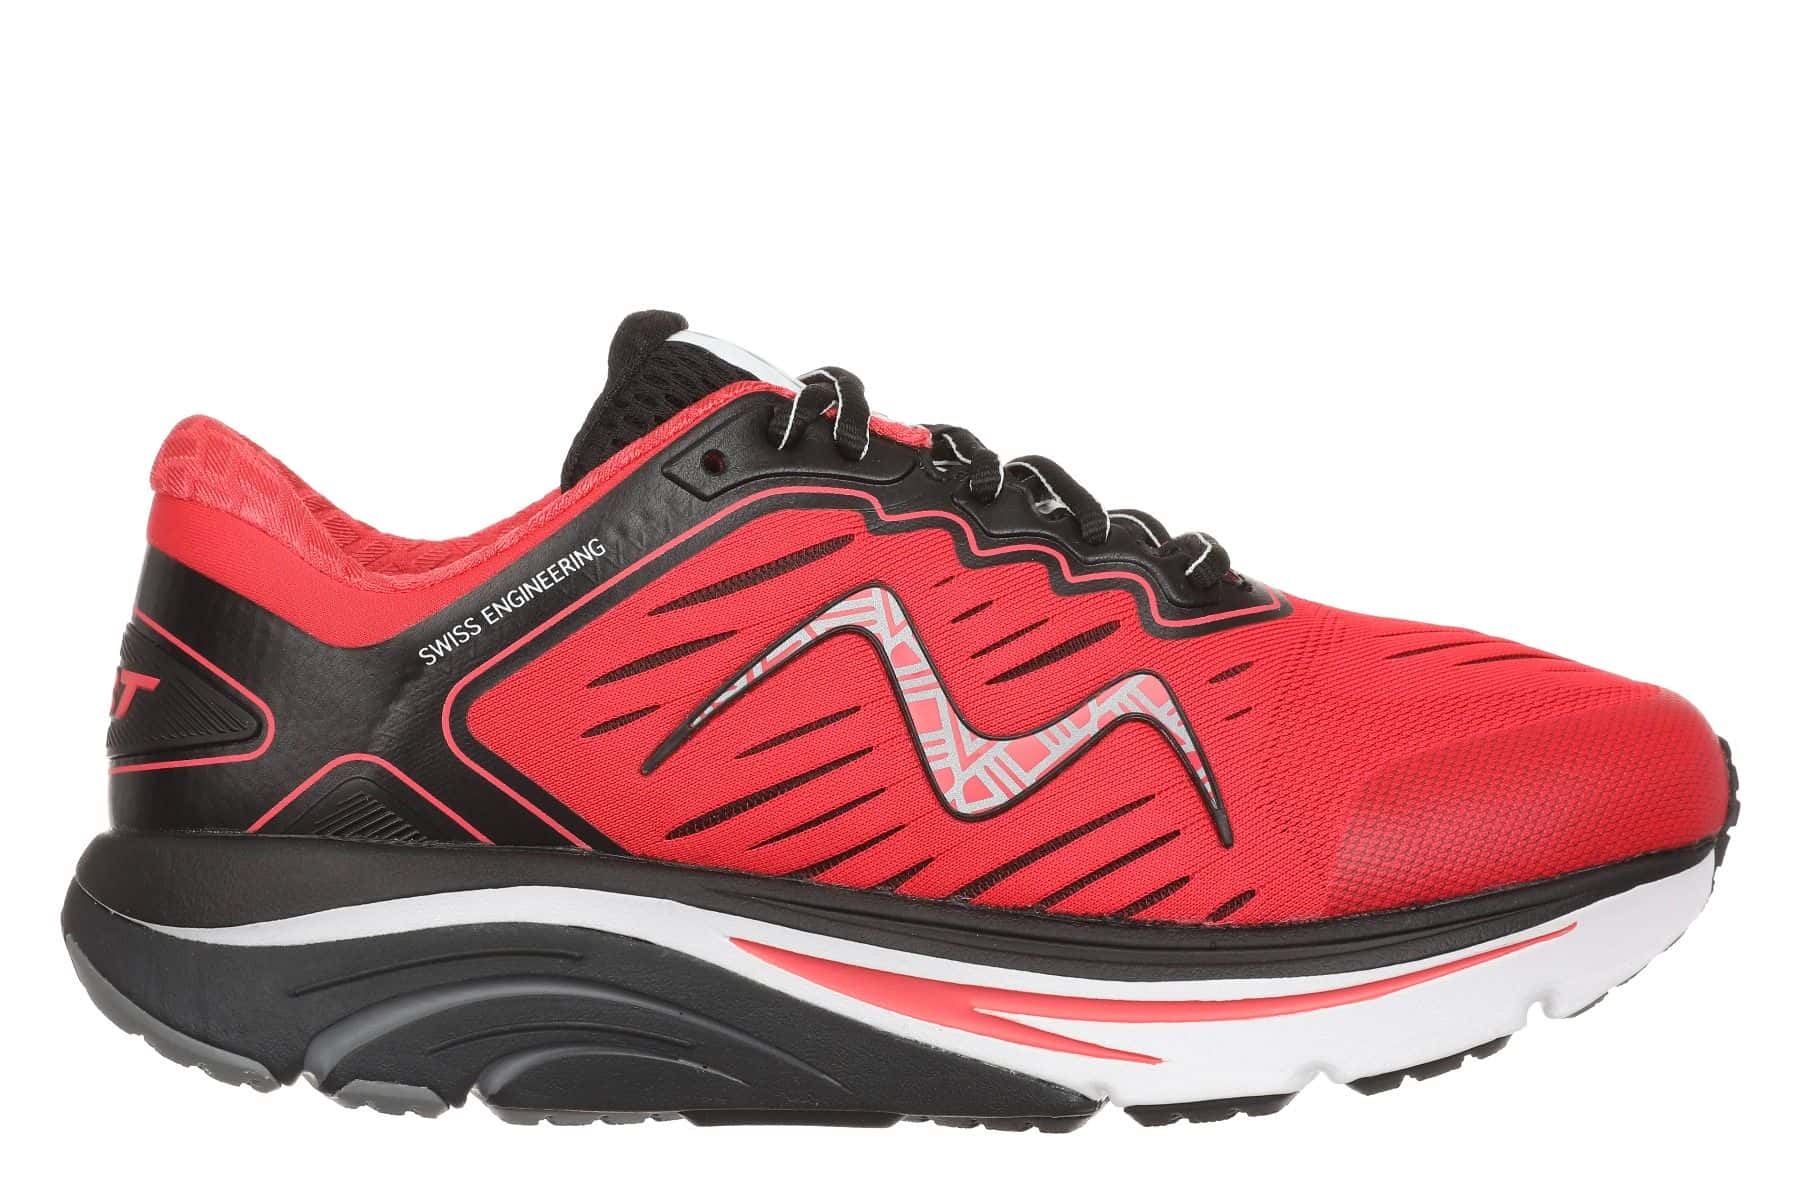 MBT MBT-2000 II LACE UP WOMEN´S RUNNING SHOES